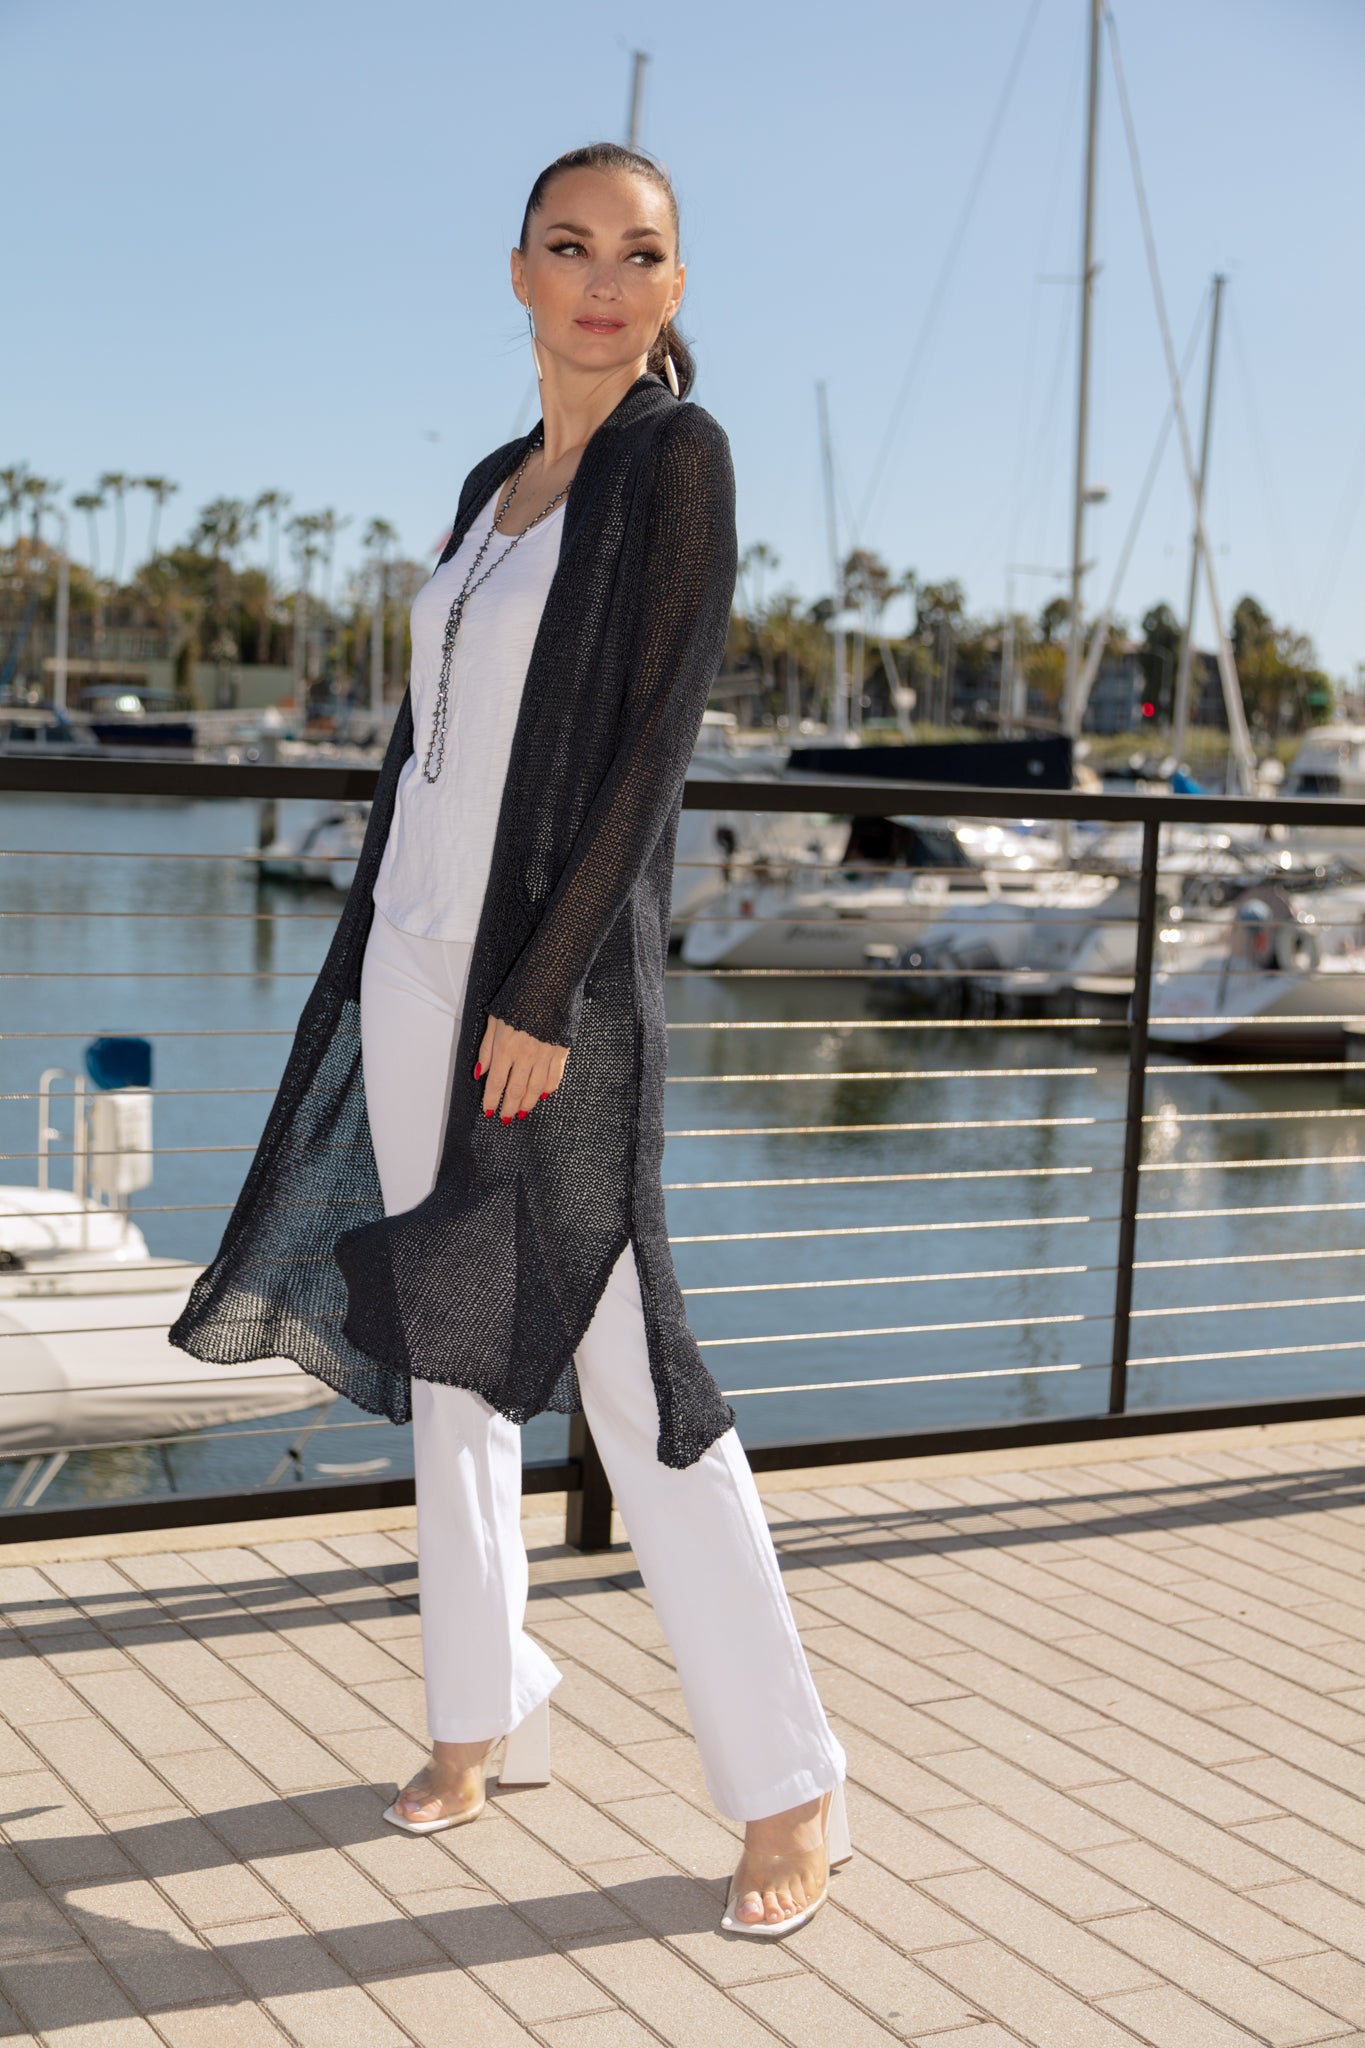 3153 Women's Knit Duster, Slits and Pockets